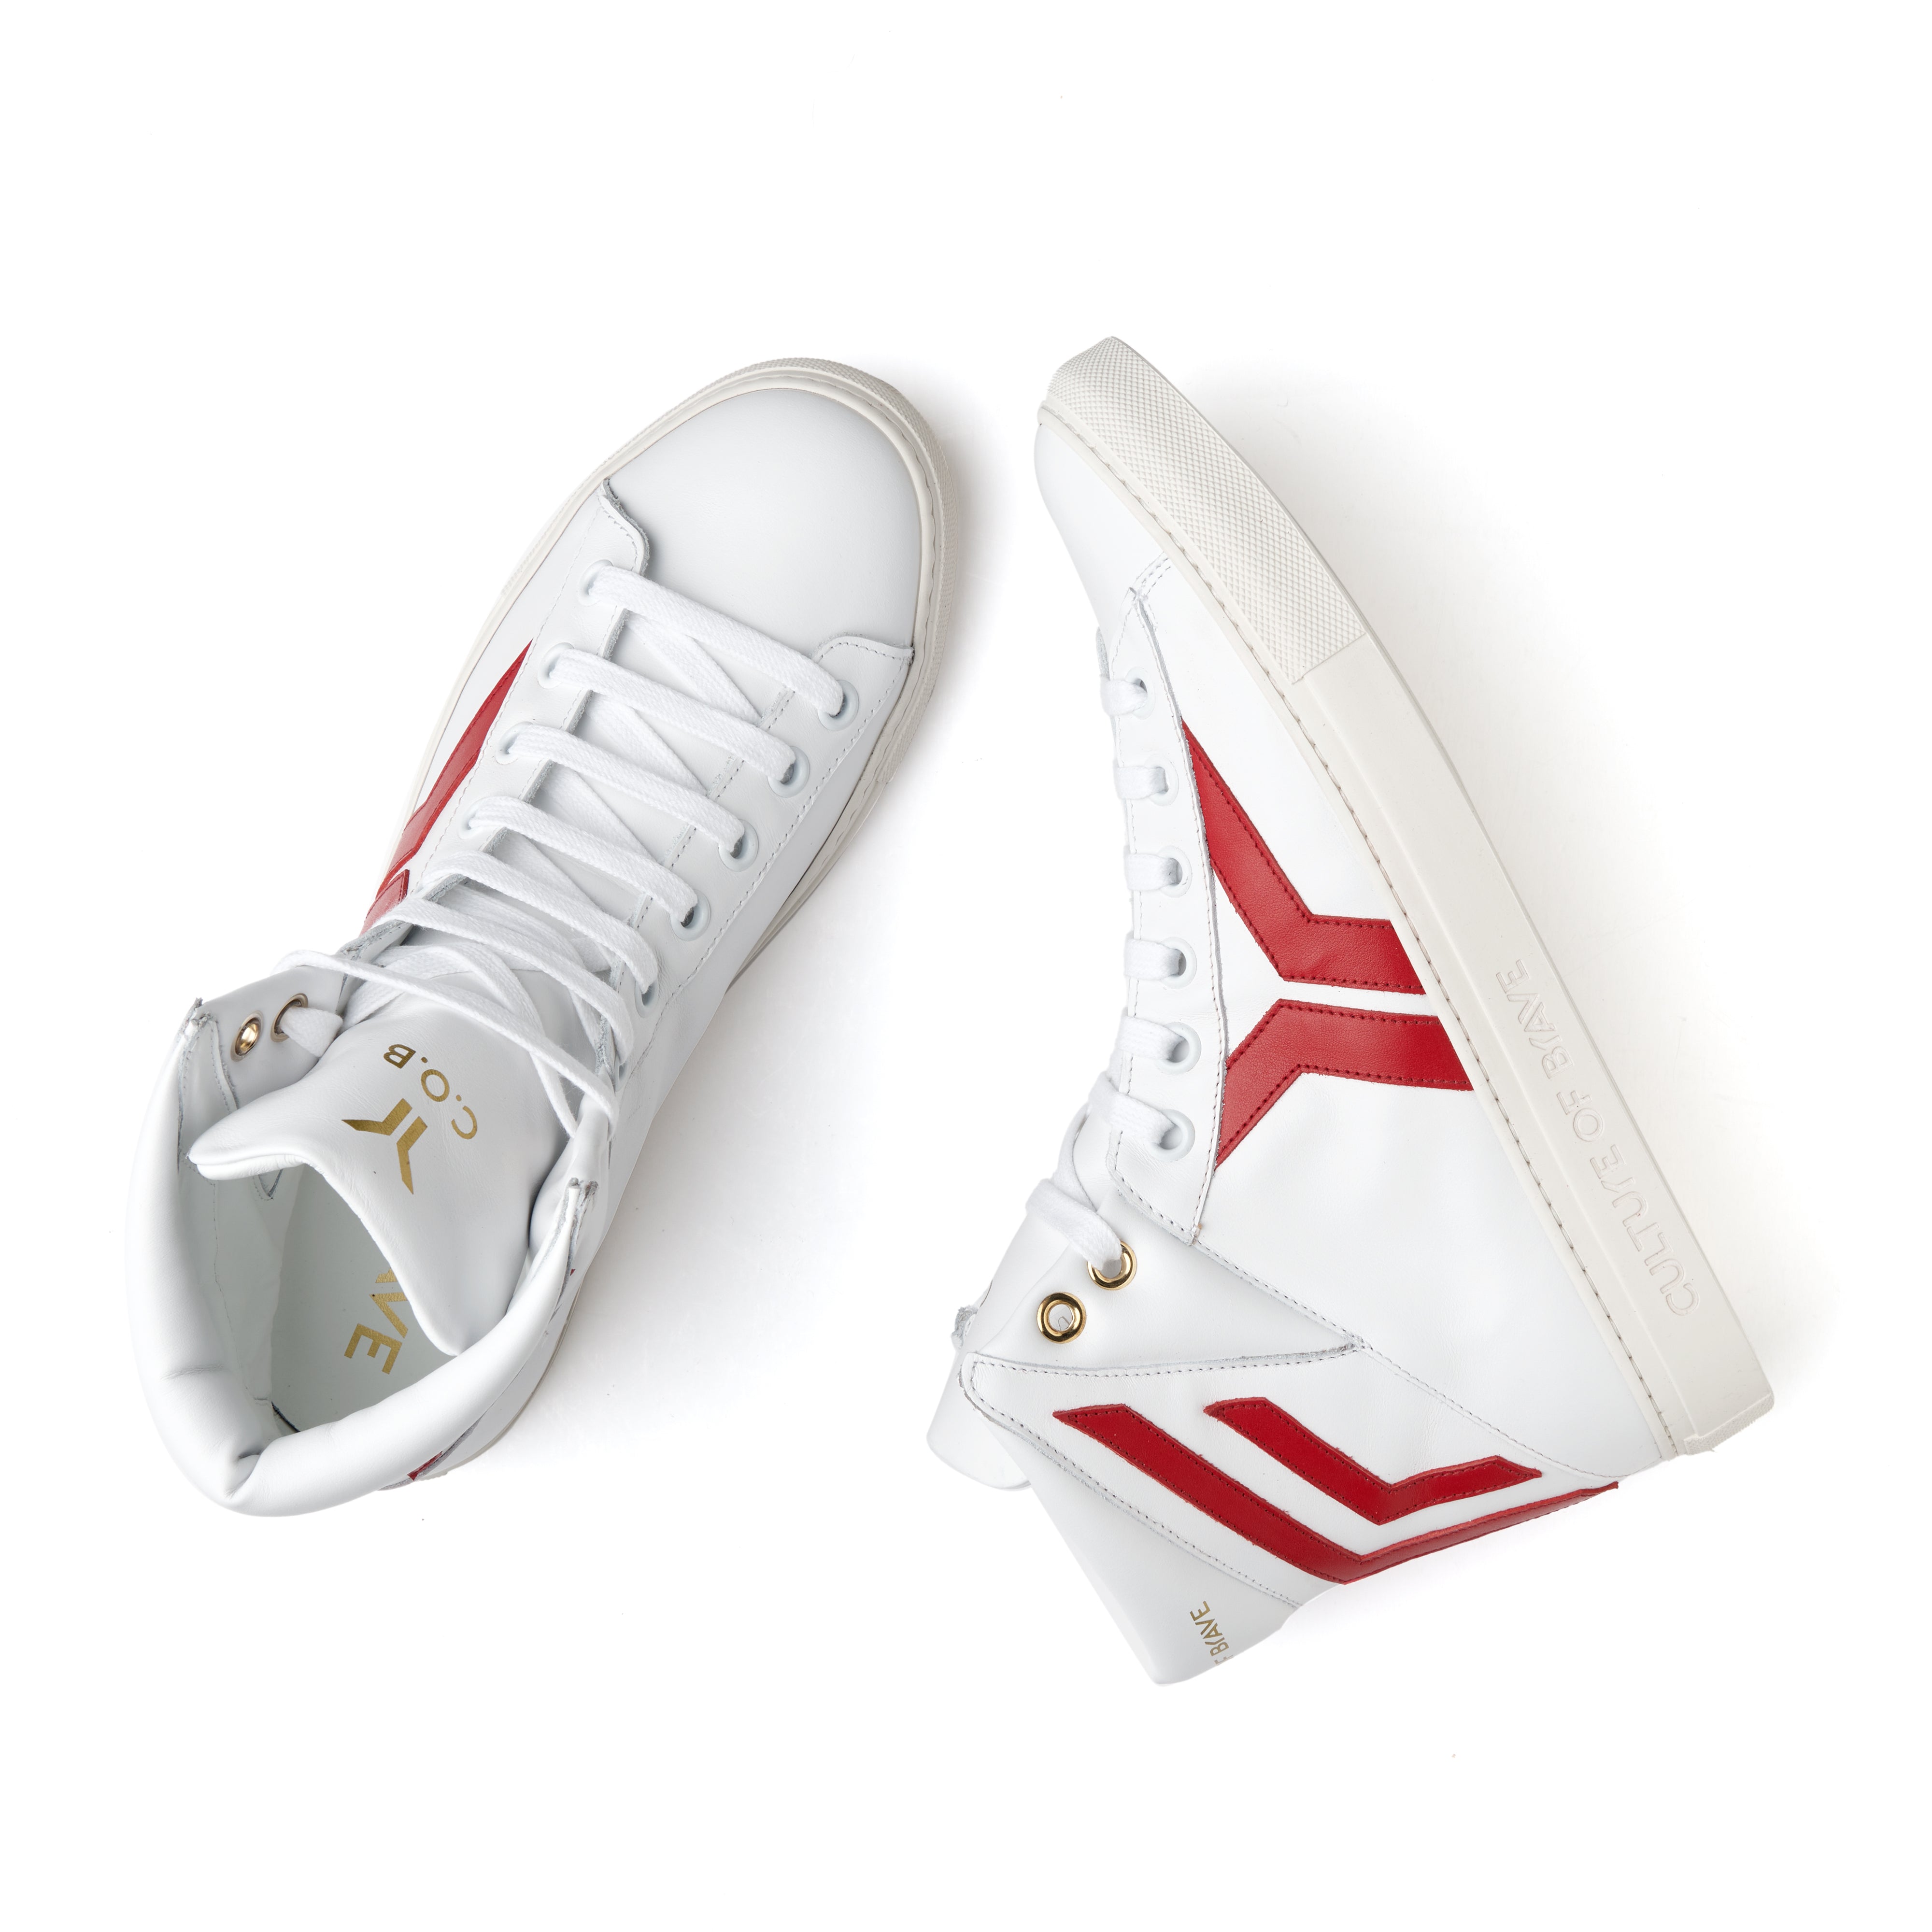 Prepared to Risk S23 Women White leather red wing high cut